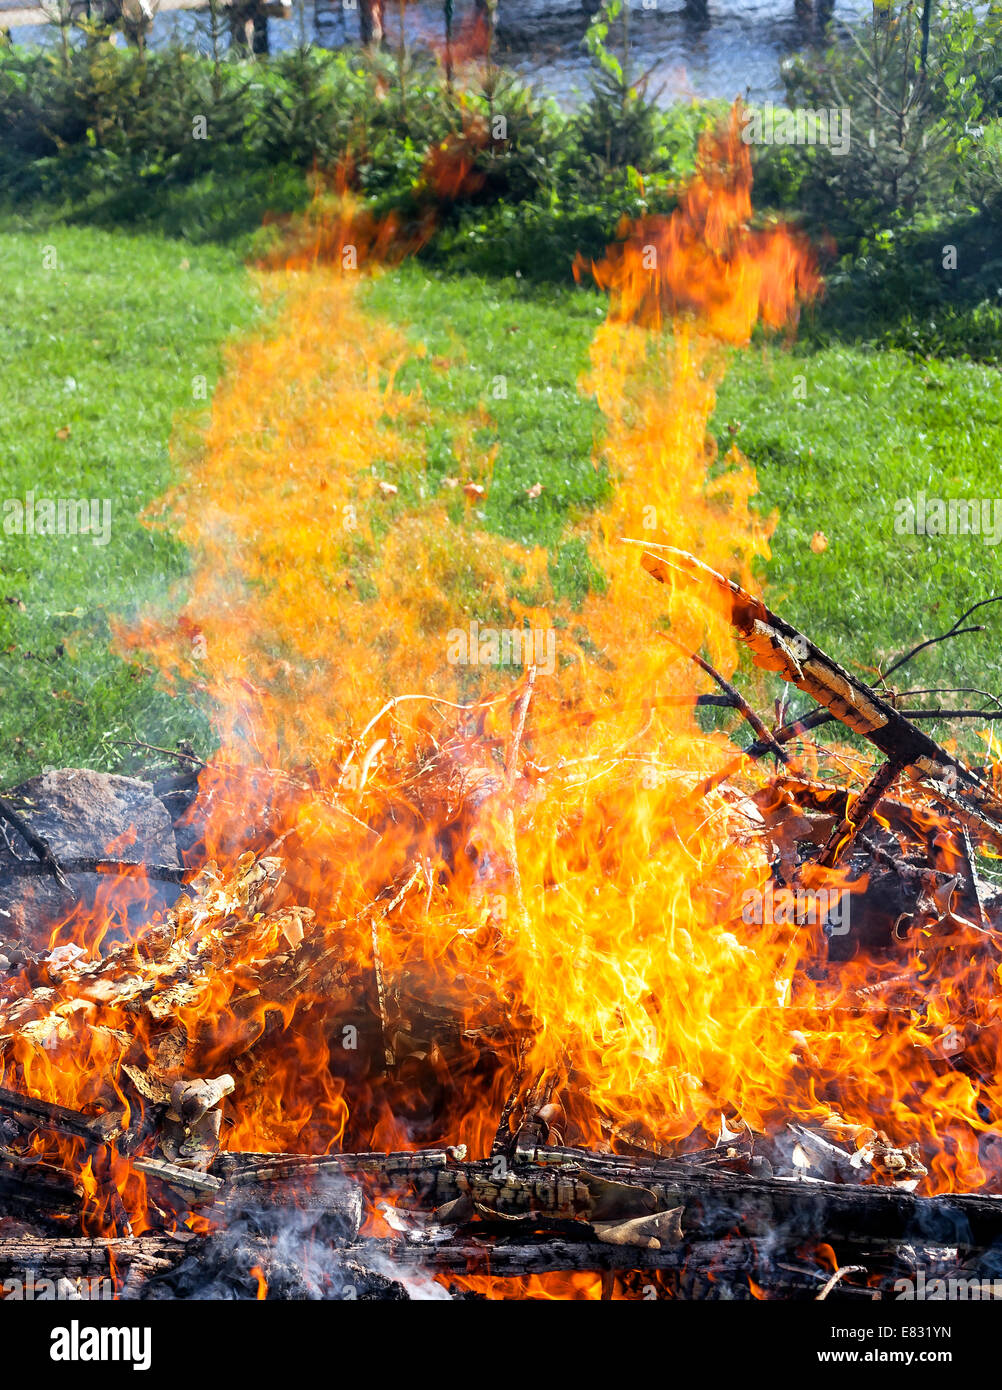 Garbage in fire, illegal garden burning out. Stock Photo